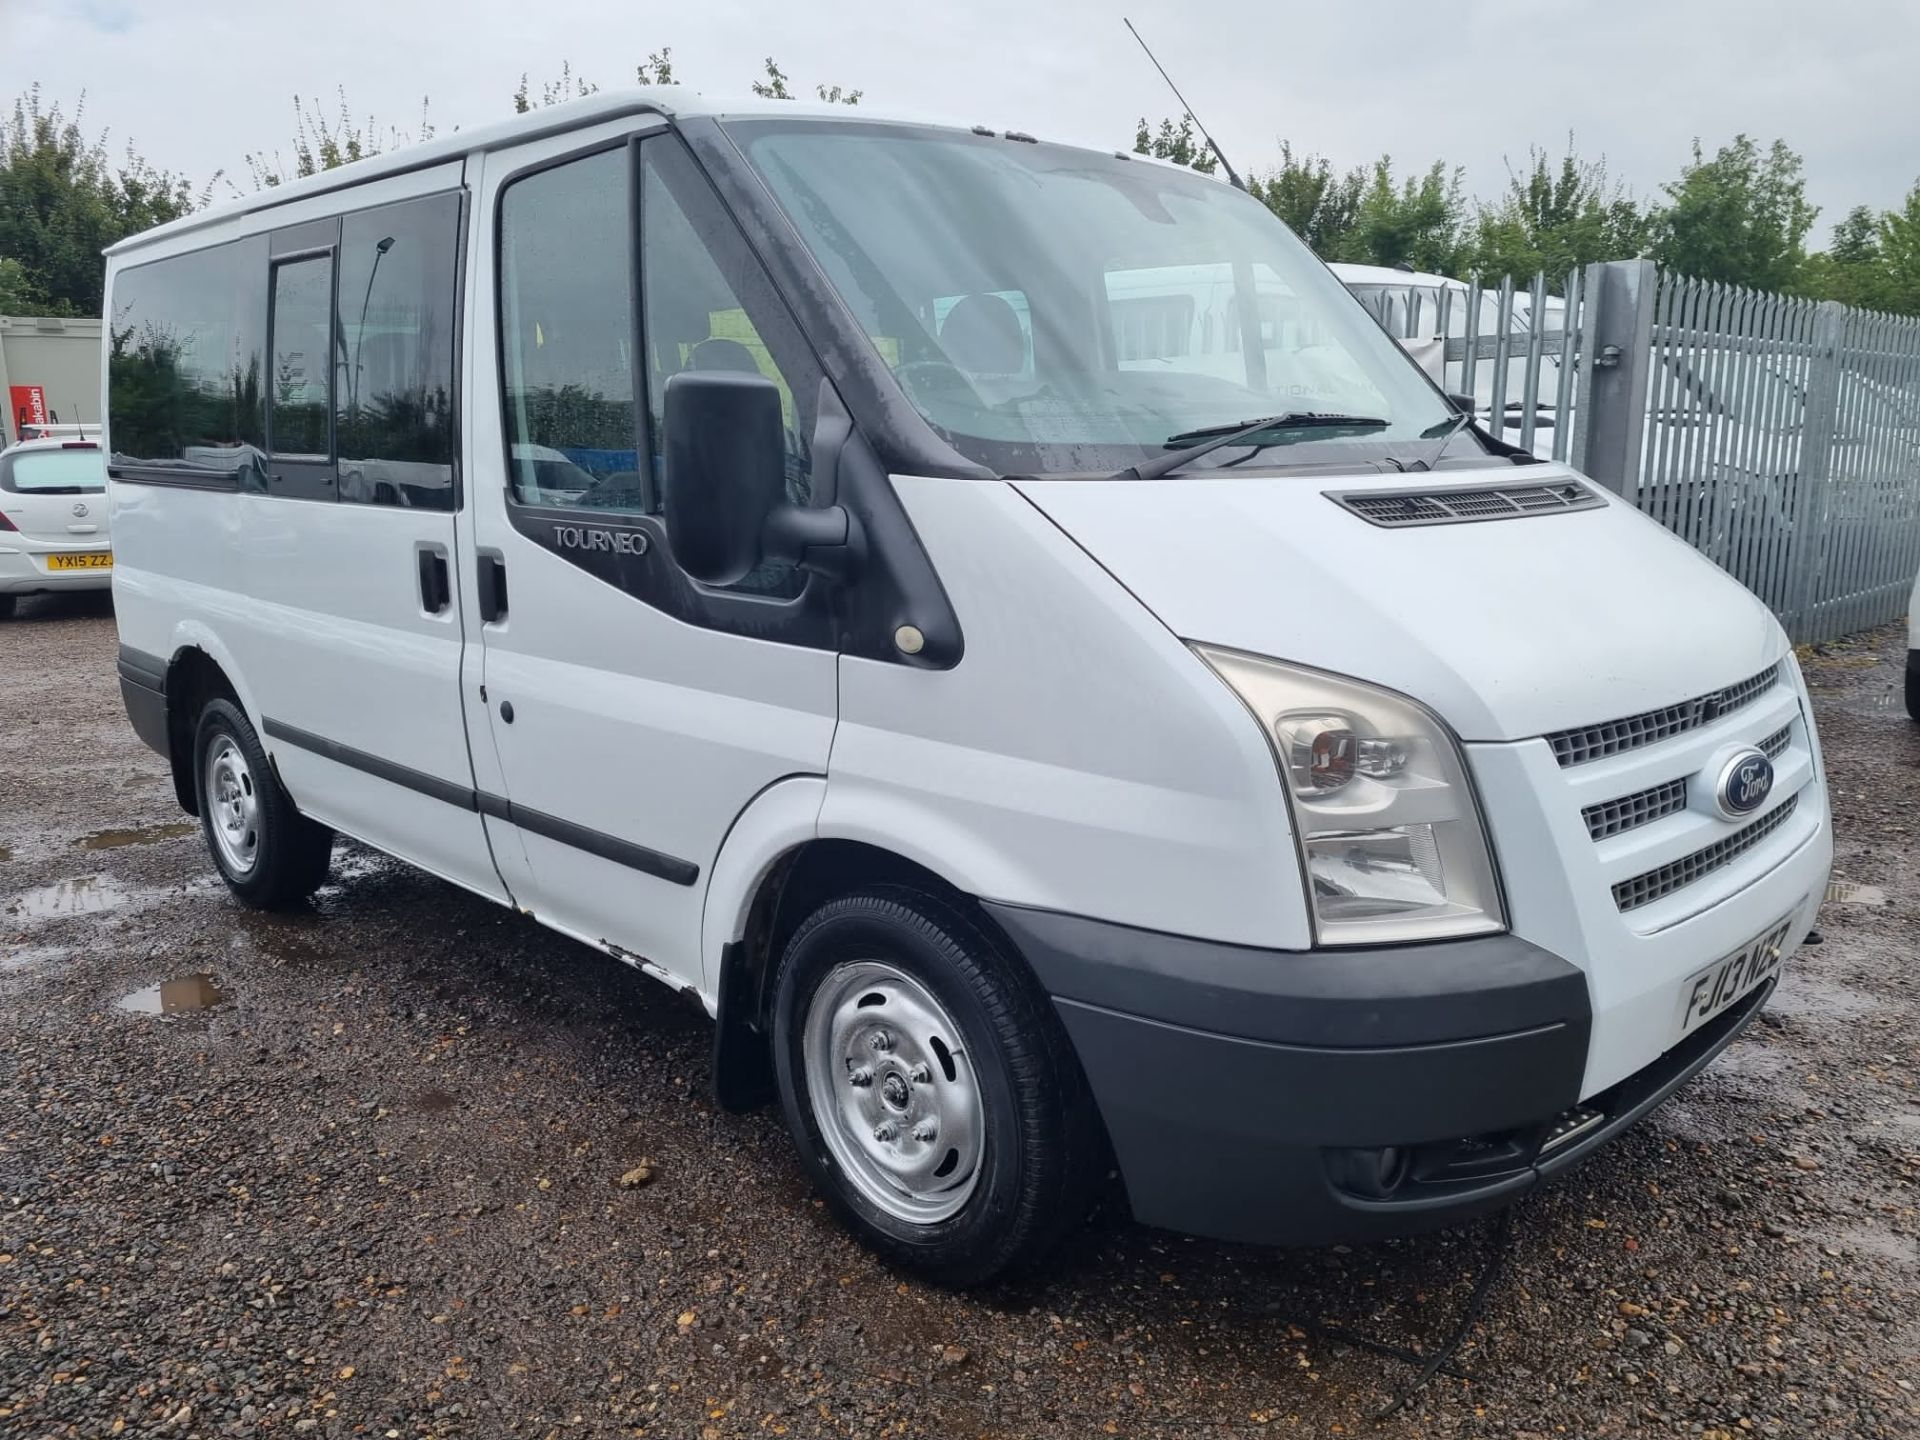 Ford Transit 2.2 Trend 2013 '13 Reg' 9 seats - Air Con - Cruise Control